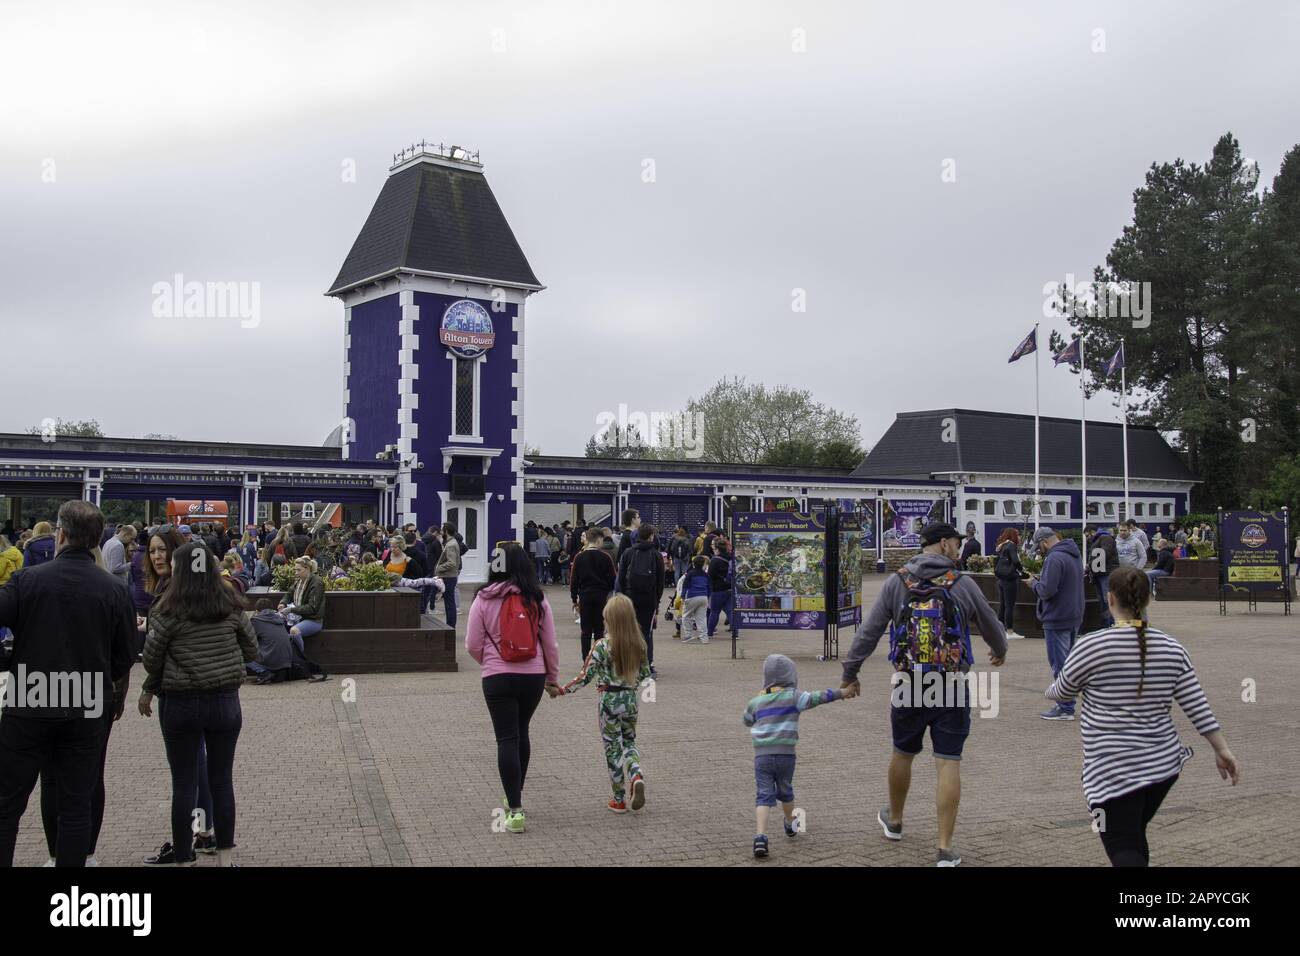 ALTON, UNITED KINGDOM - Apr 06, 2019: Entrance to Alton Towers Resort. Is a theme park resort located in Staffordshire, England.  Is operated by Merli Stock Photo